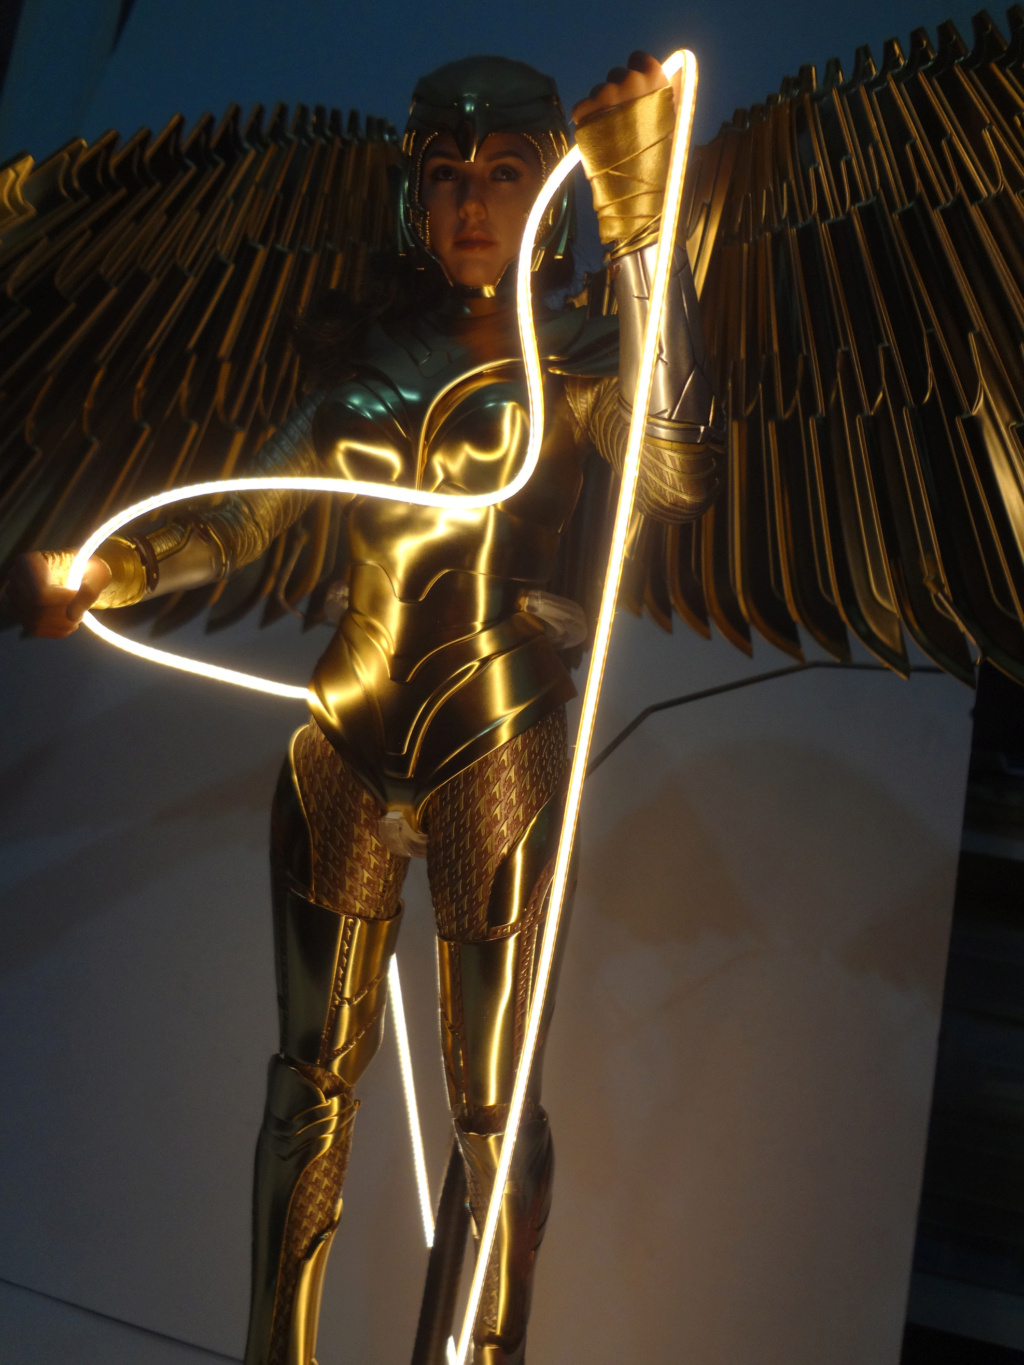 NEW PRODUCT: HOT TOYS: WONDER WOMAN 1984: GOLDEN ARMOR WONDER WOMAN 1/6TH SCALE COLLECTIBLE FIGURE (Standard & Deluxe Versions) - Page 2 Dsc04217